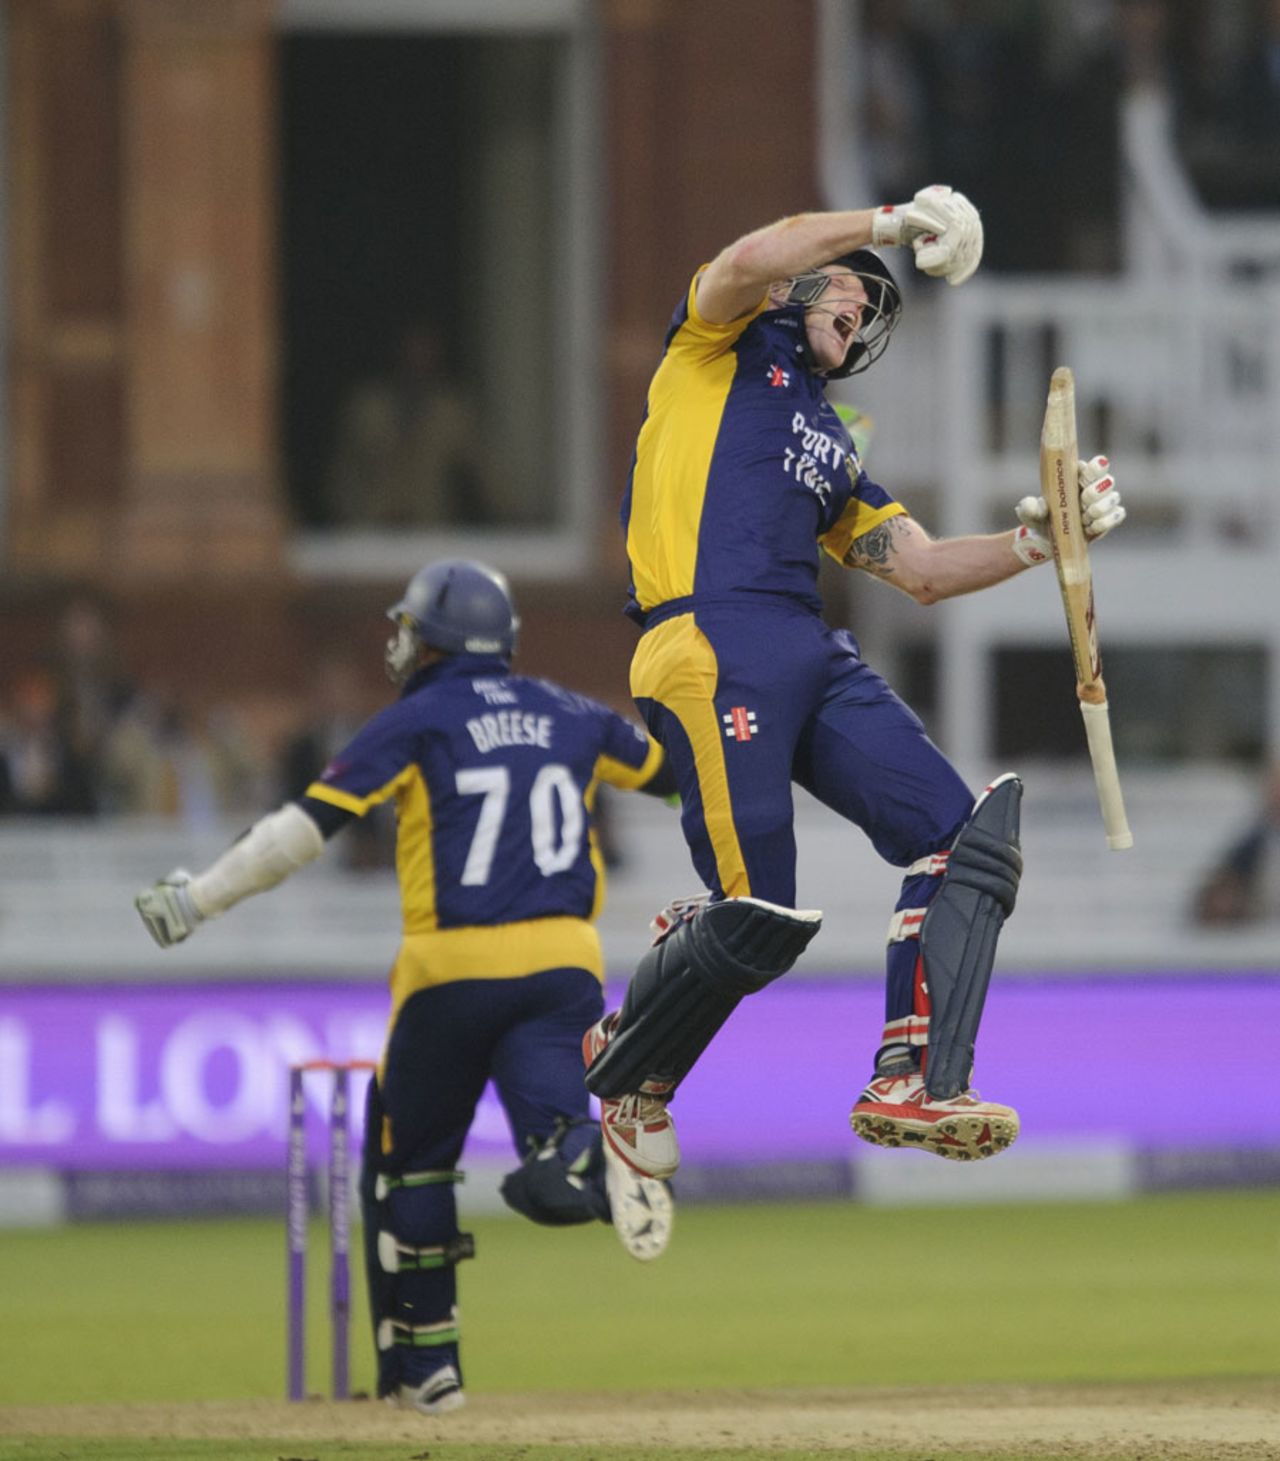 Ben Stokes celebrates as the winning runs are scored, Durham v Warwickshire, Royal London Cup final, Lord's, September 20, 2014